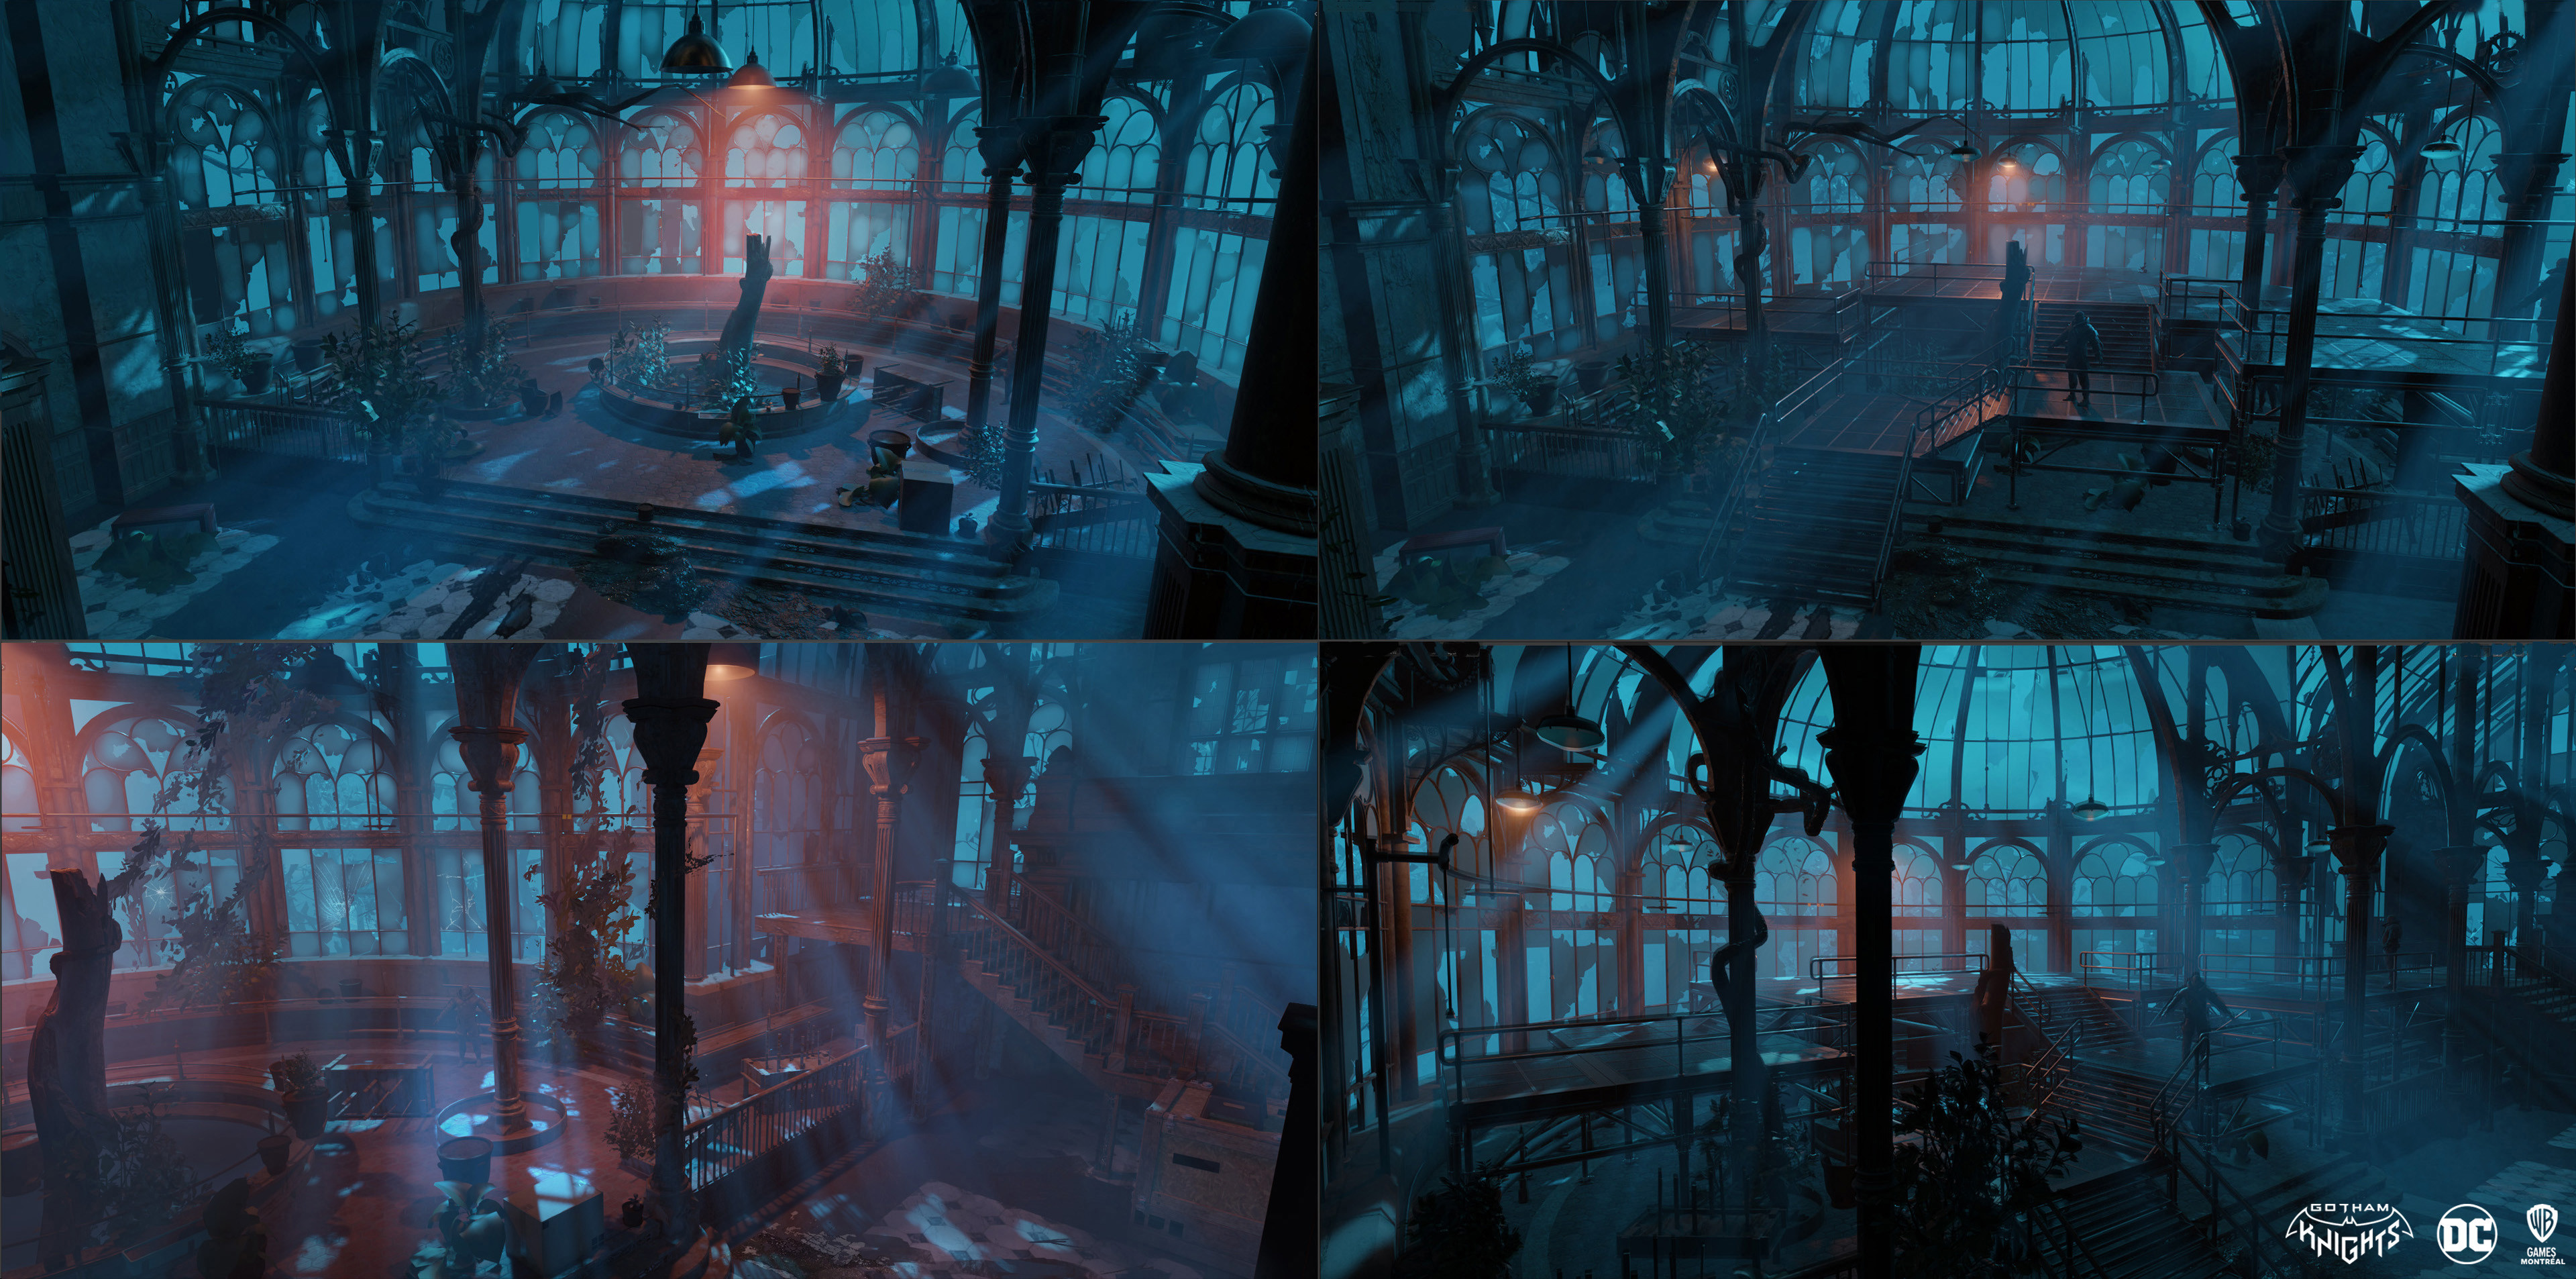 Greenhouse before and after league of shadow portable lab platform